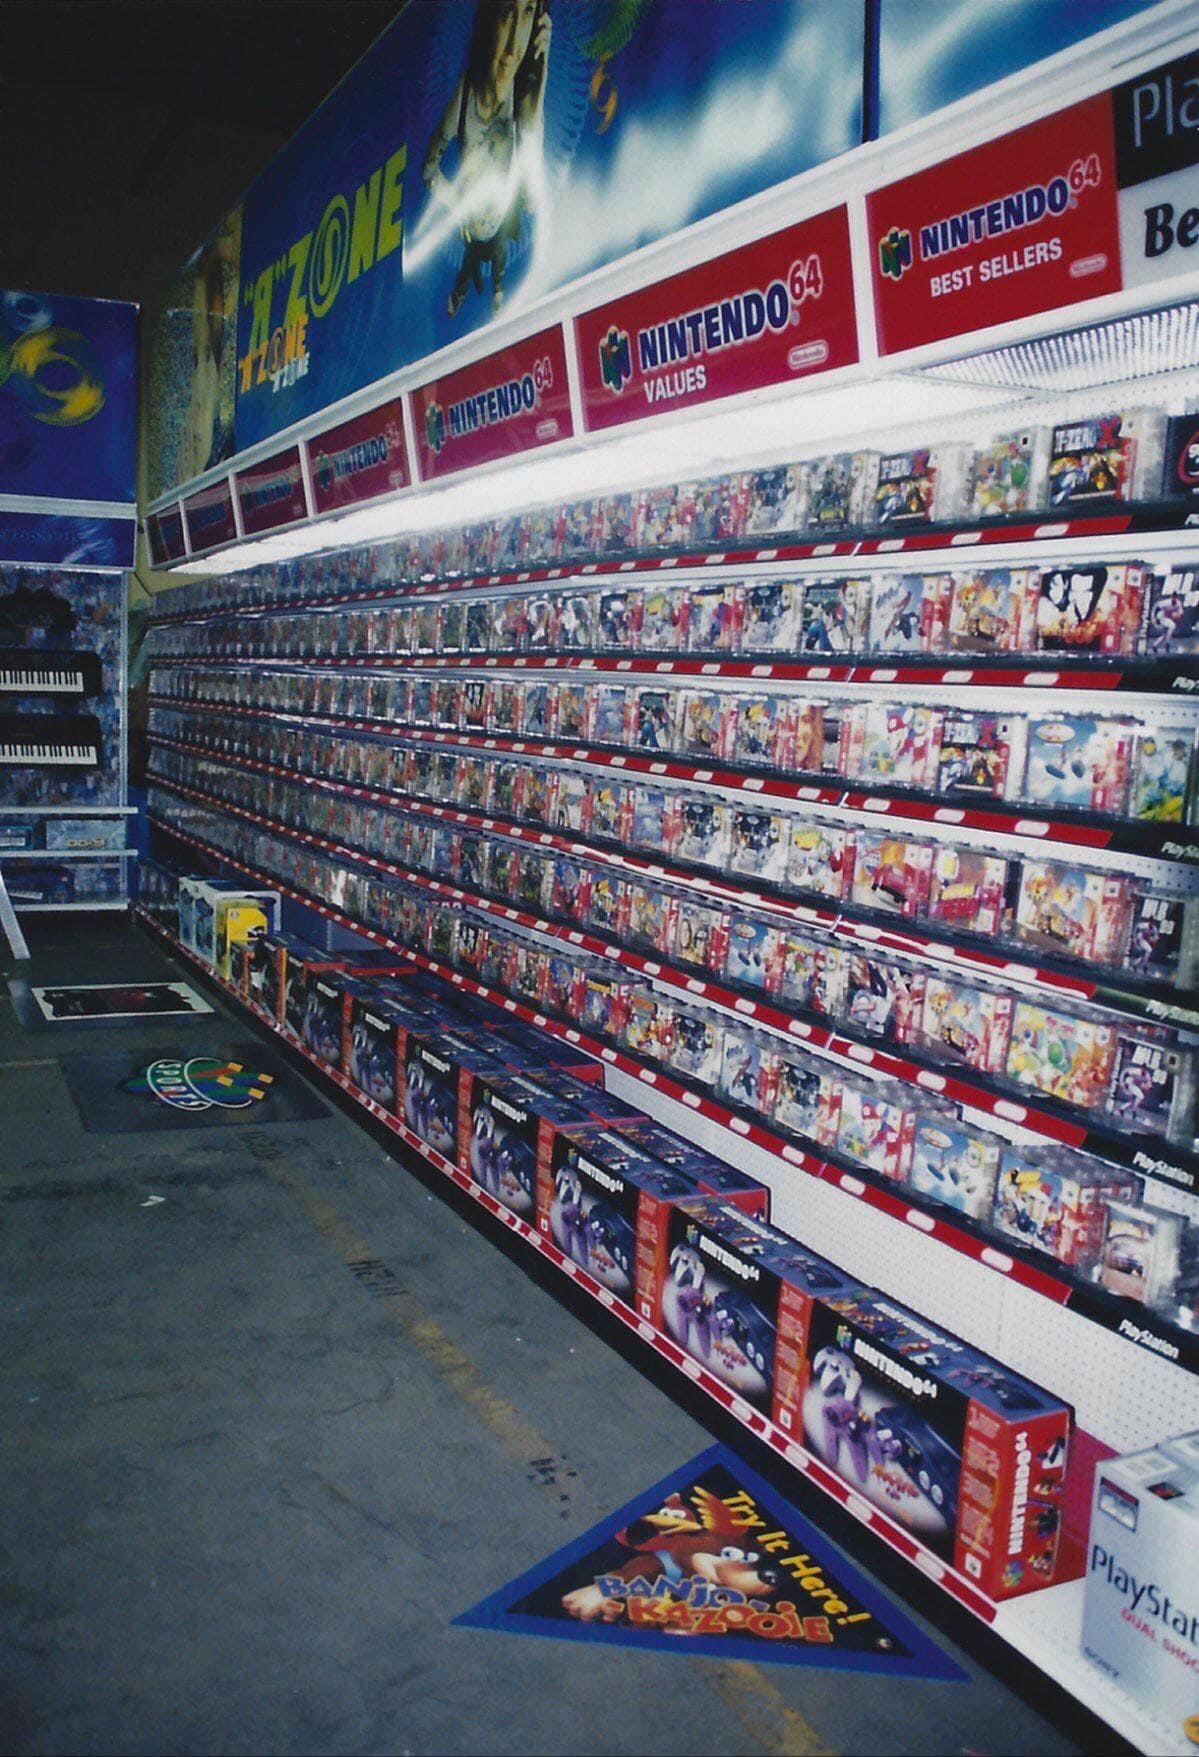 toys r us video game aisle - Pla Be Best Sellers Antendo Wintendo The Here!